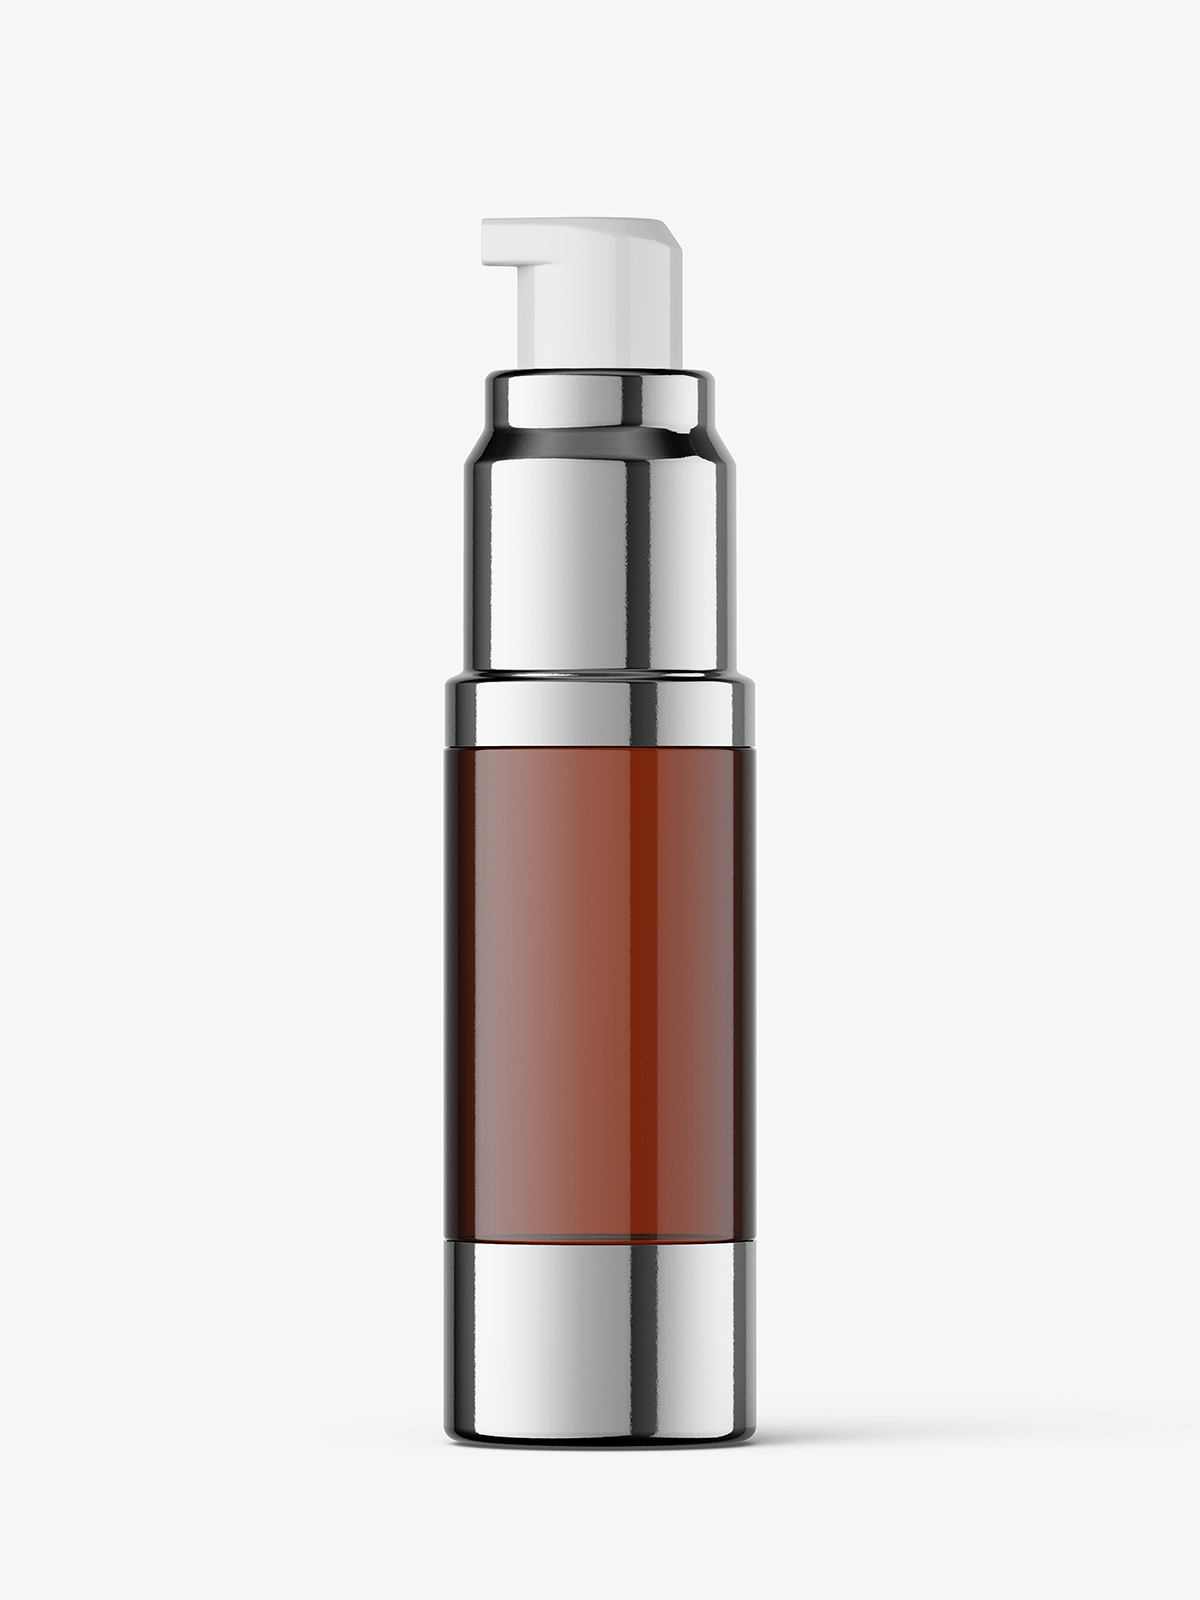 Download Airless bottle mockup / amber glass / 15 ml - Smarty Mockups